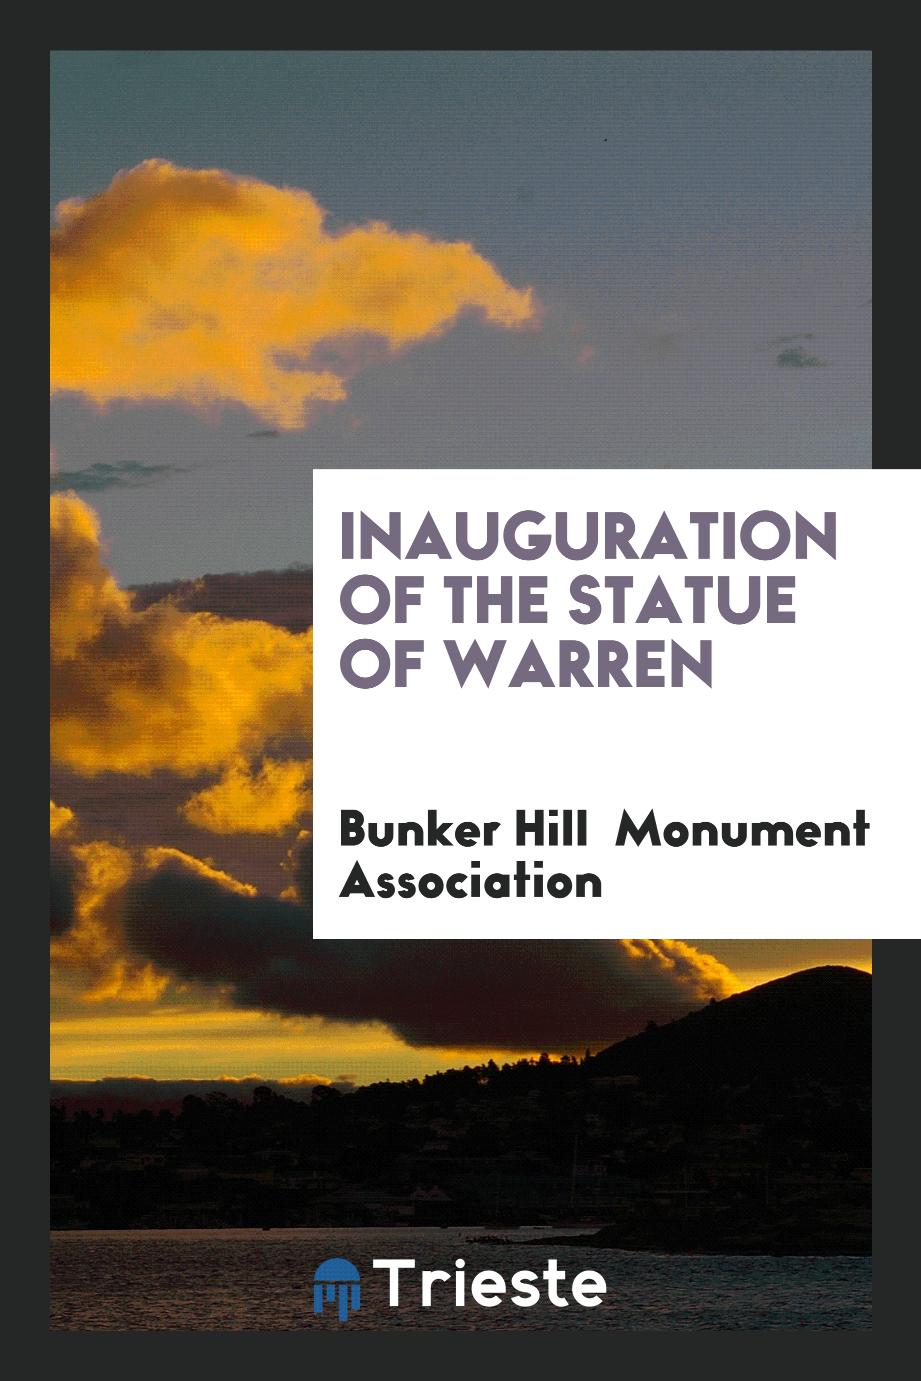 Inauguration of the statue of Warren